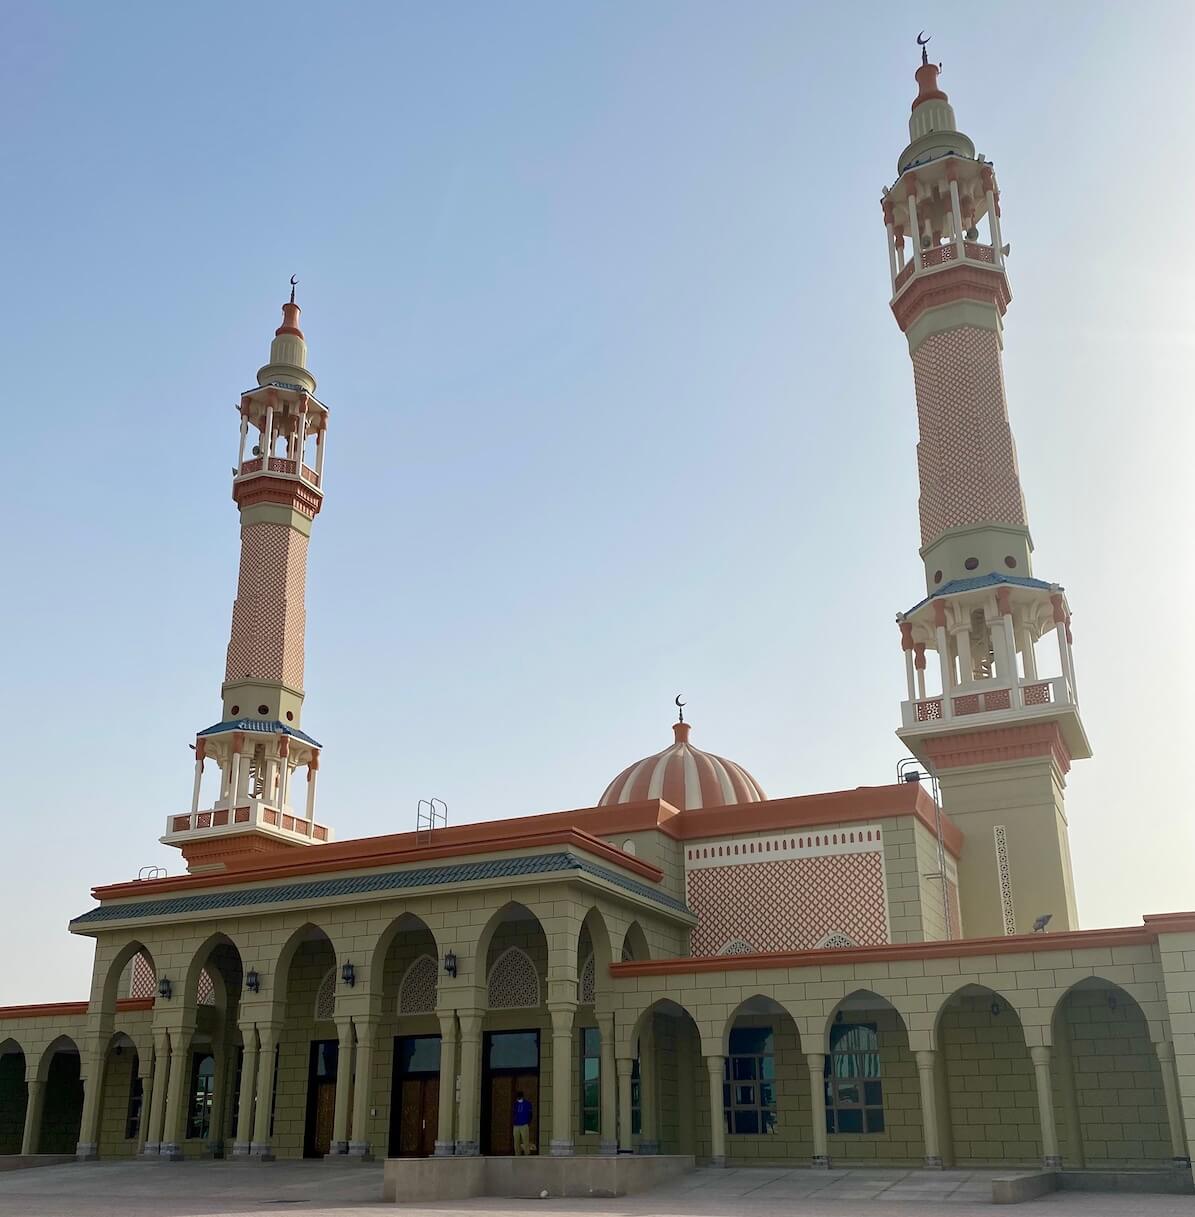 Mosque with red and white stripe dome and minarets with red patterns
